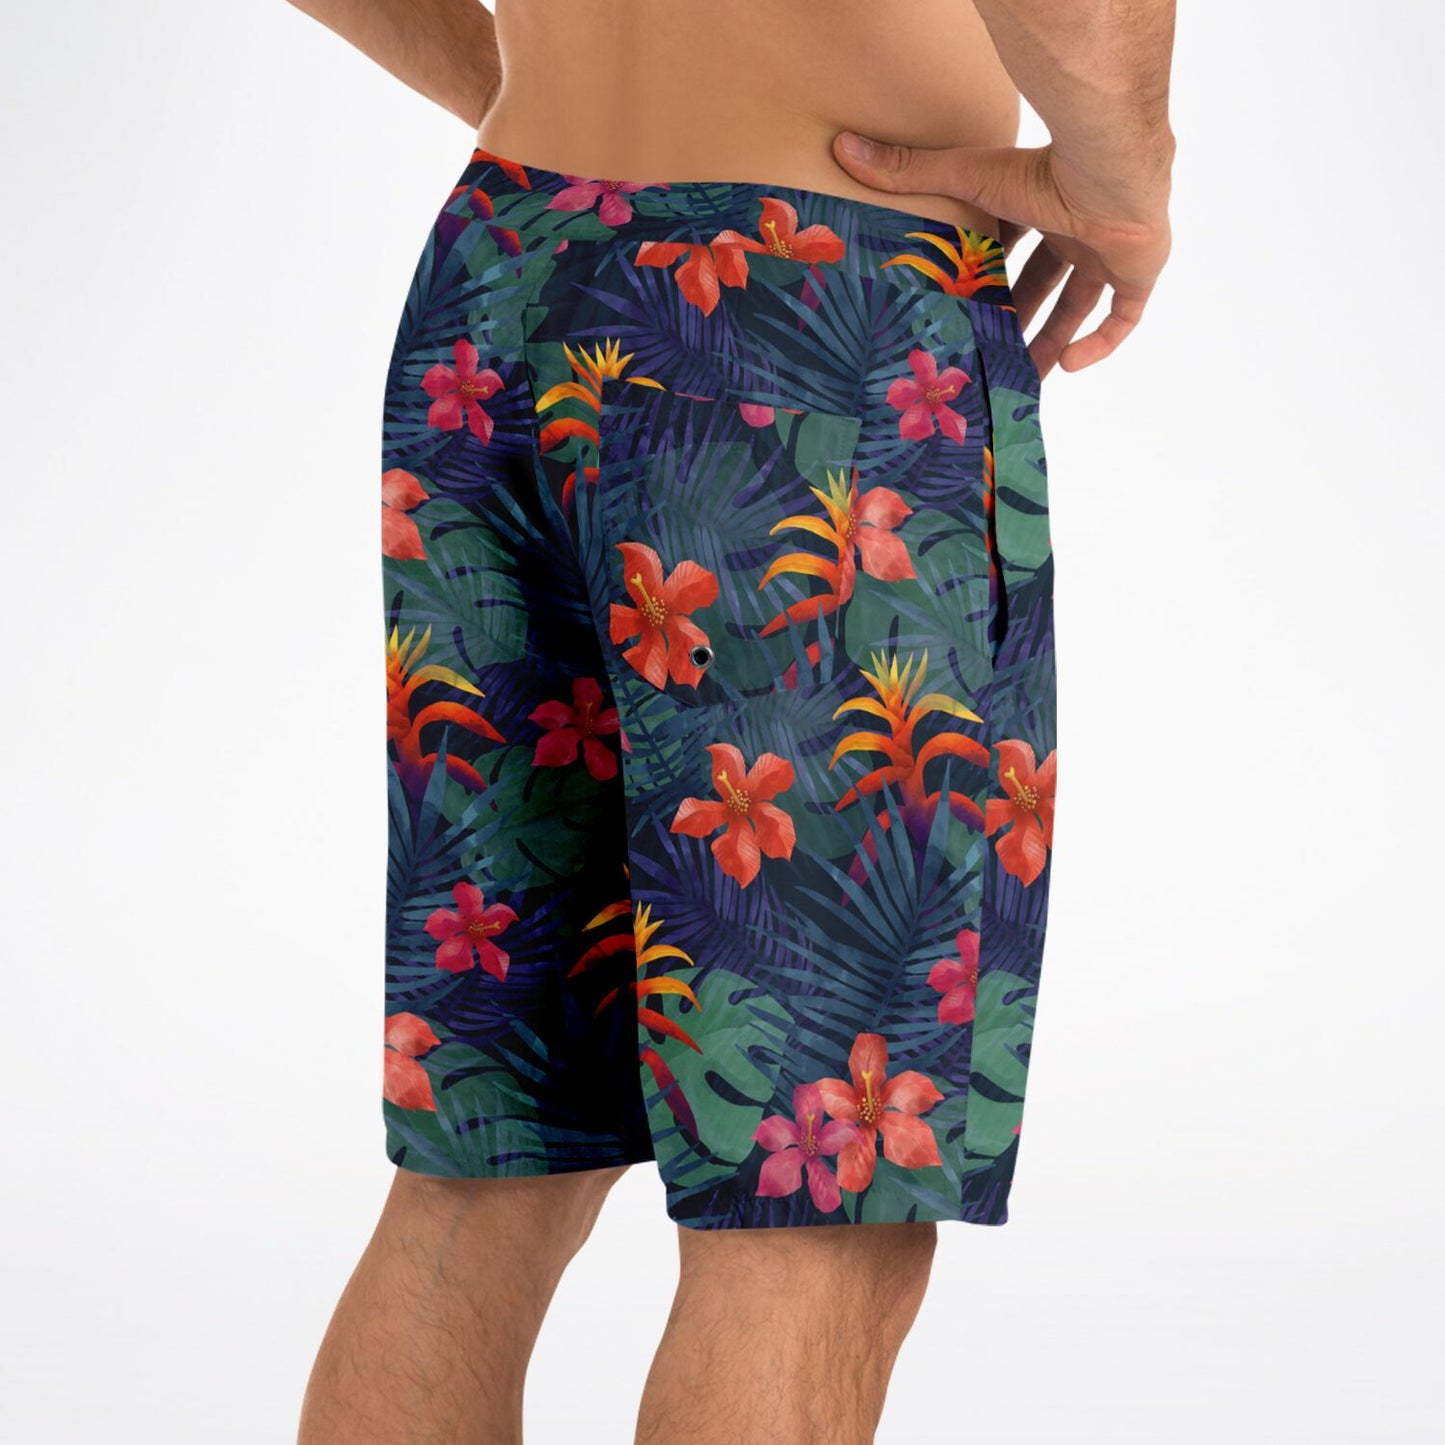 Tropical Men Board Shorts, Jungle Flowers Green Mid Length Blue Beach Surf Swim with Pockets & Mesh Drawstring Casual Bathing Suit